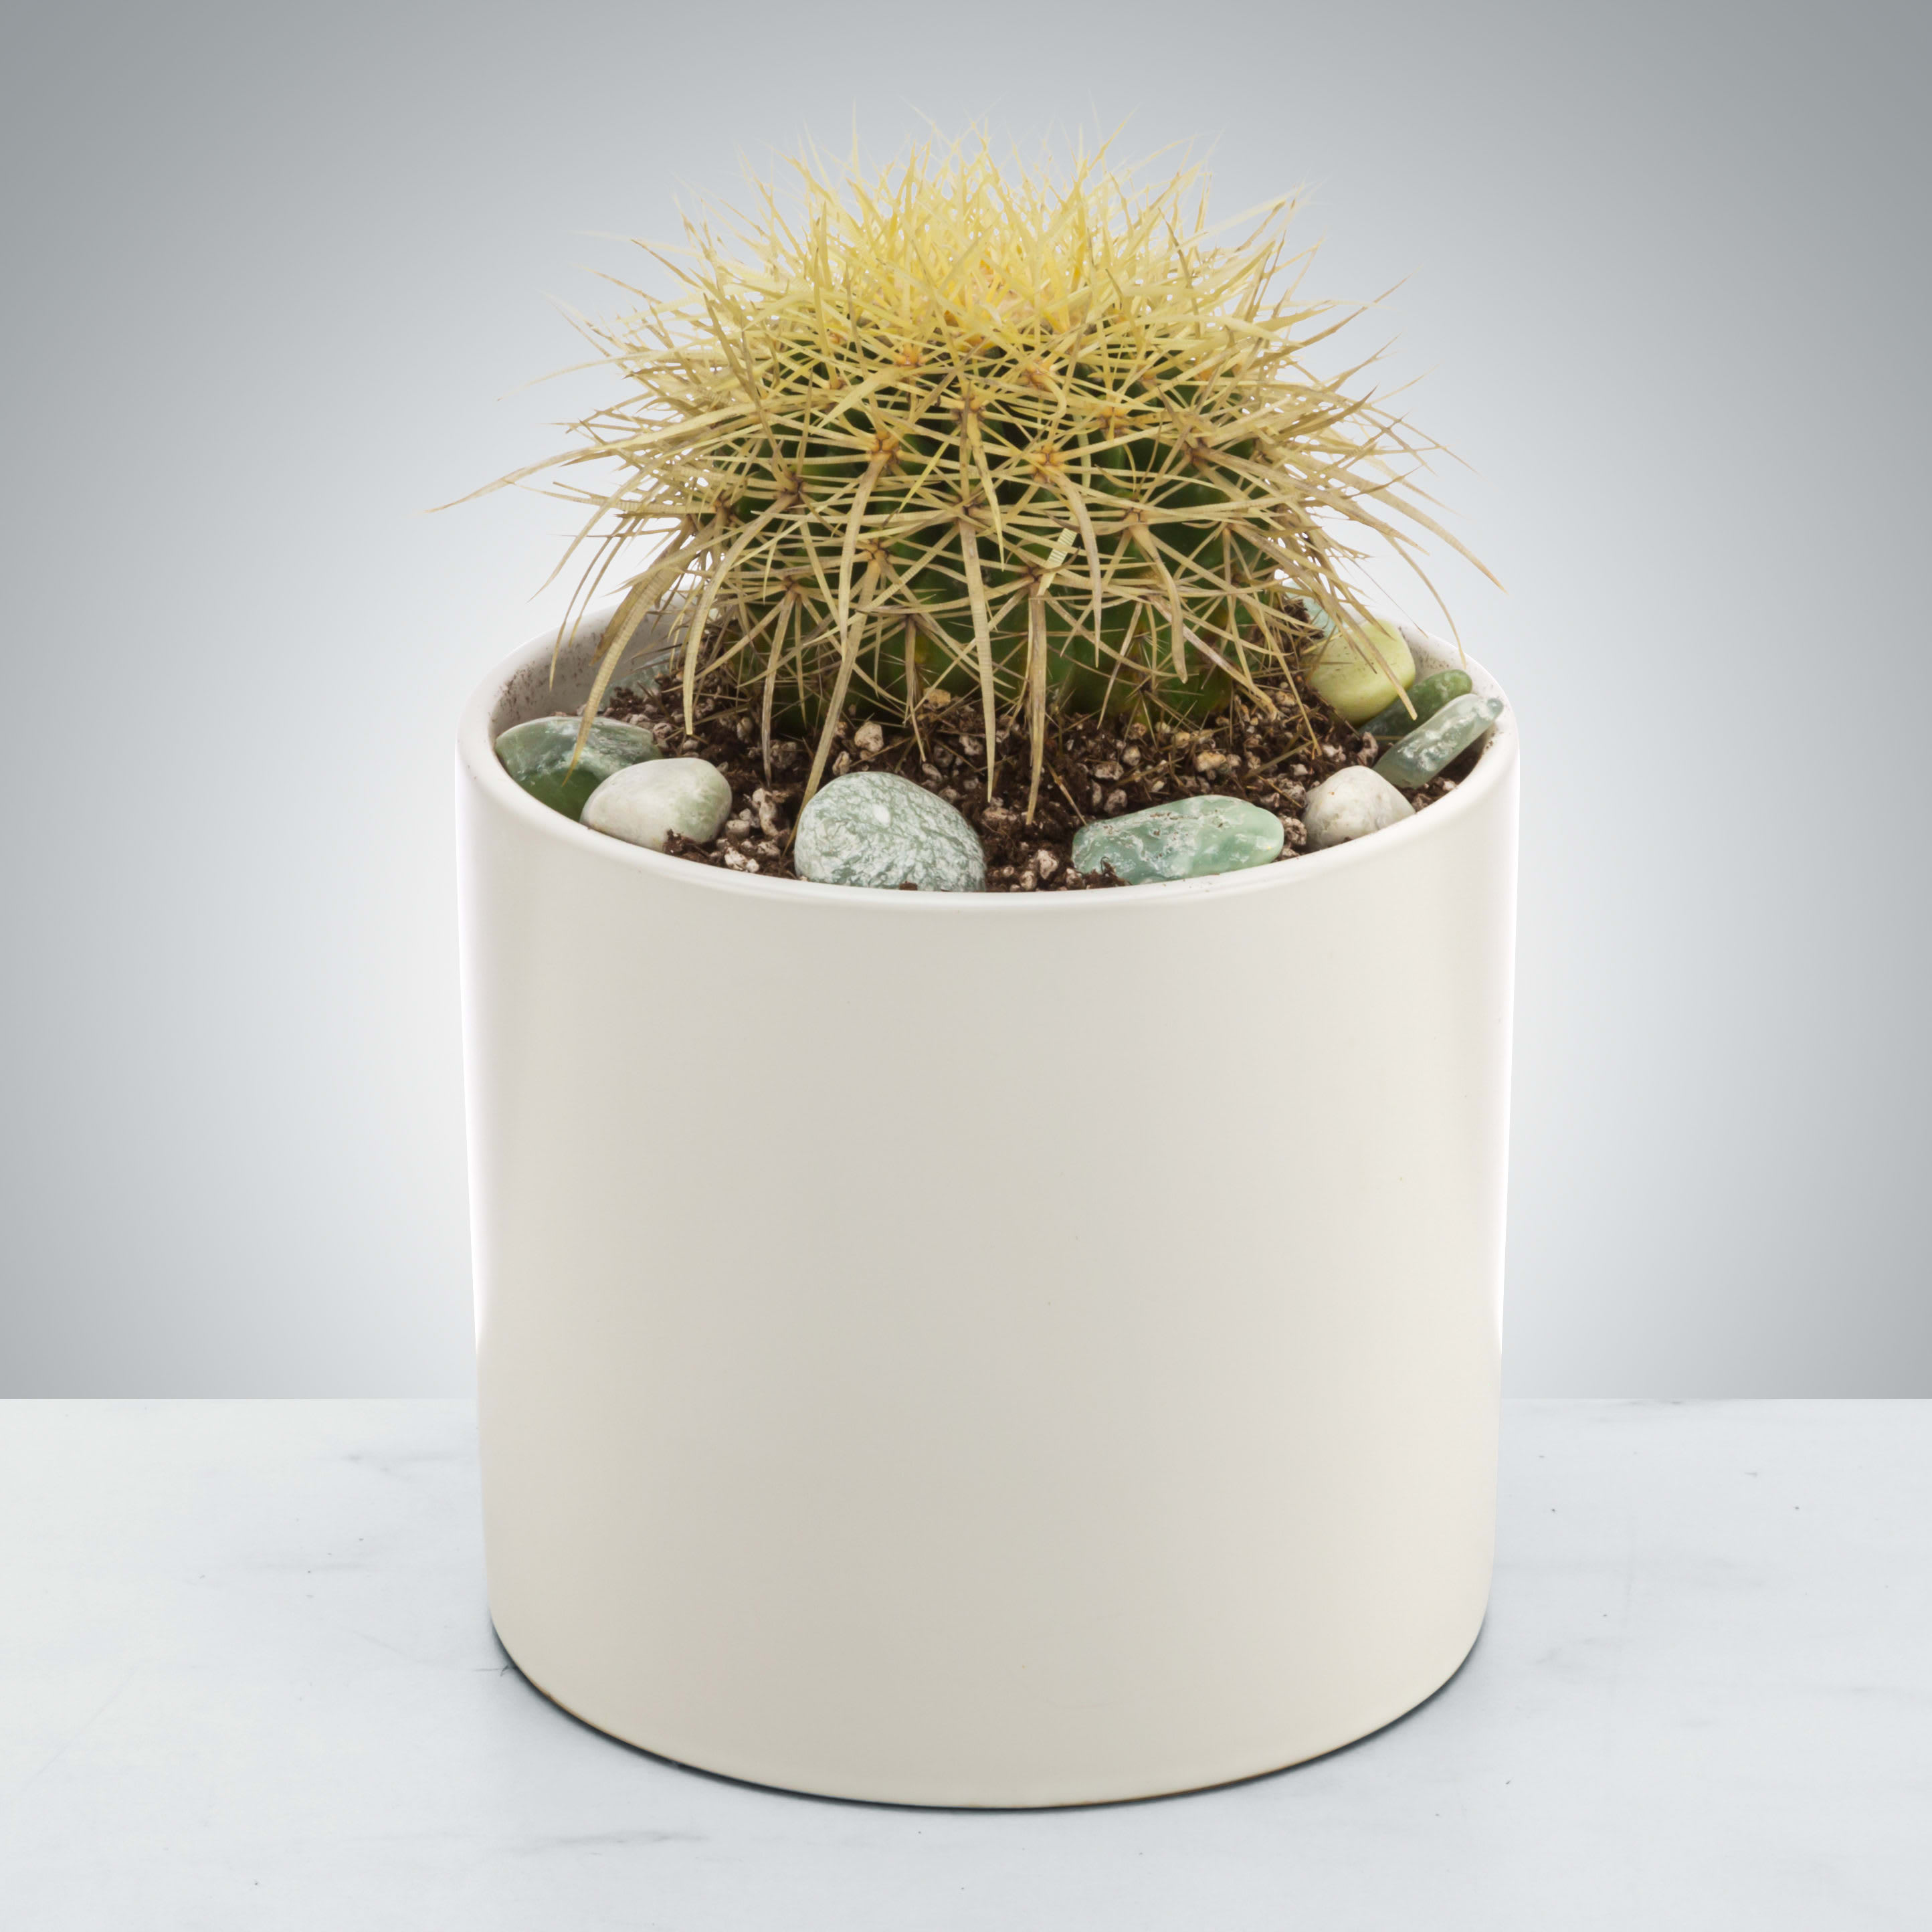 Cactus Plant by BloomNation™ - You can leave a cactus plant in a sunny window and forget about it! Infrequent watering and lots of light will keep it healthy making it a great gift for an absent-minded or frequently traveling individual.